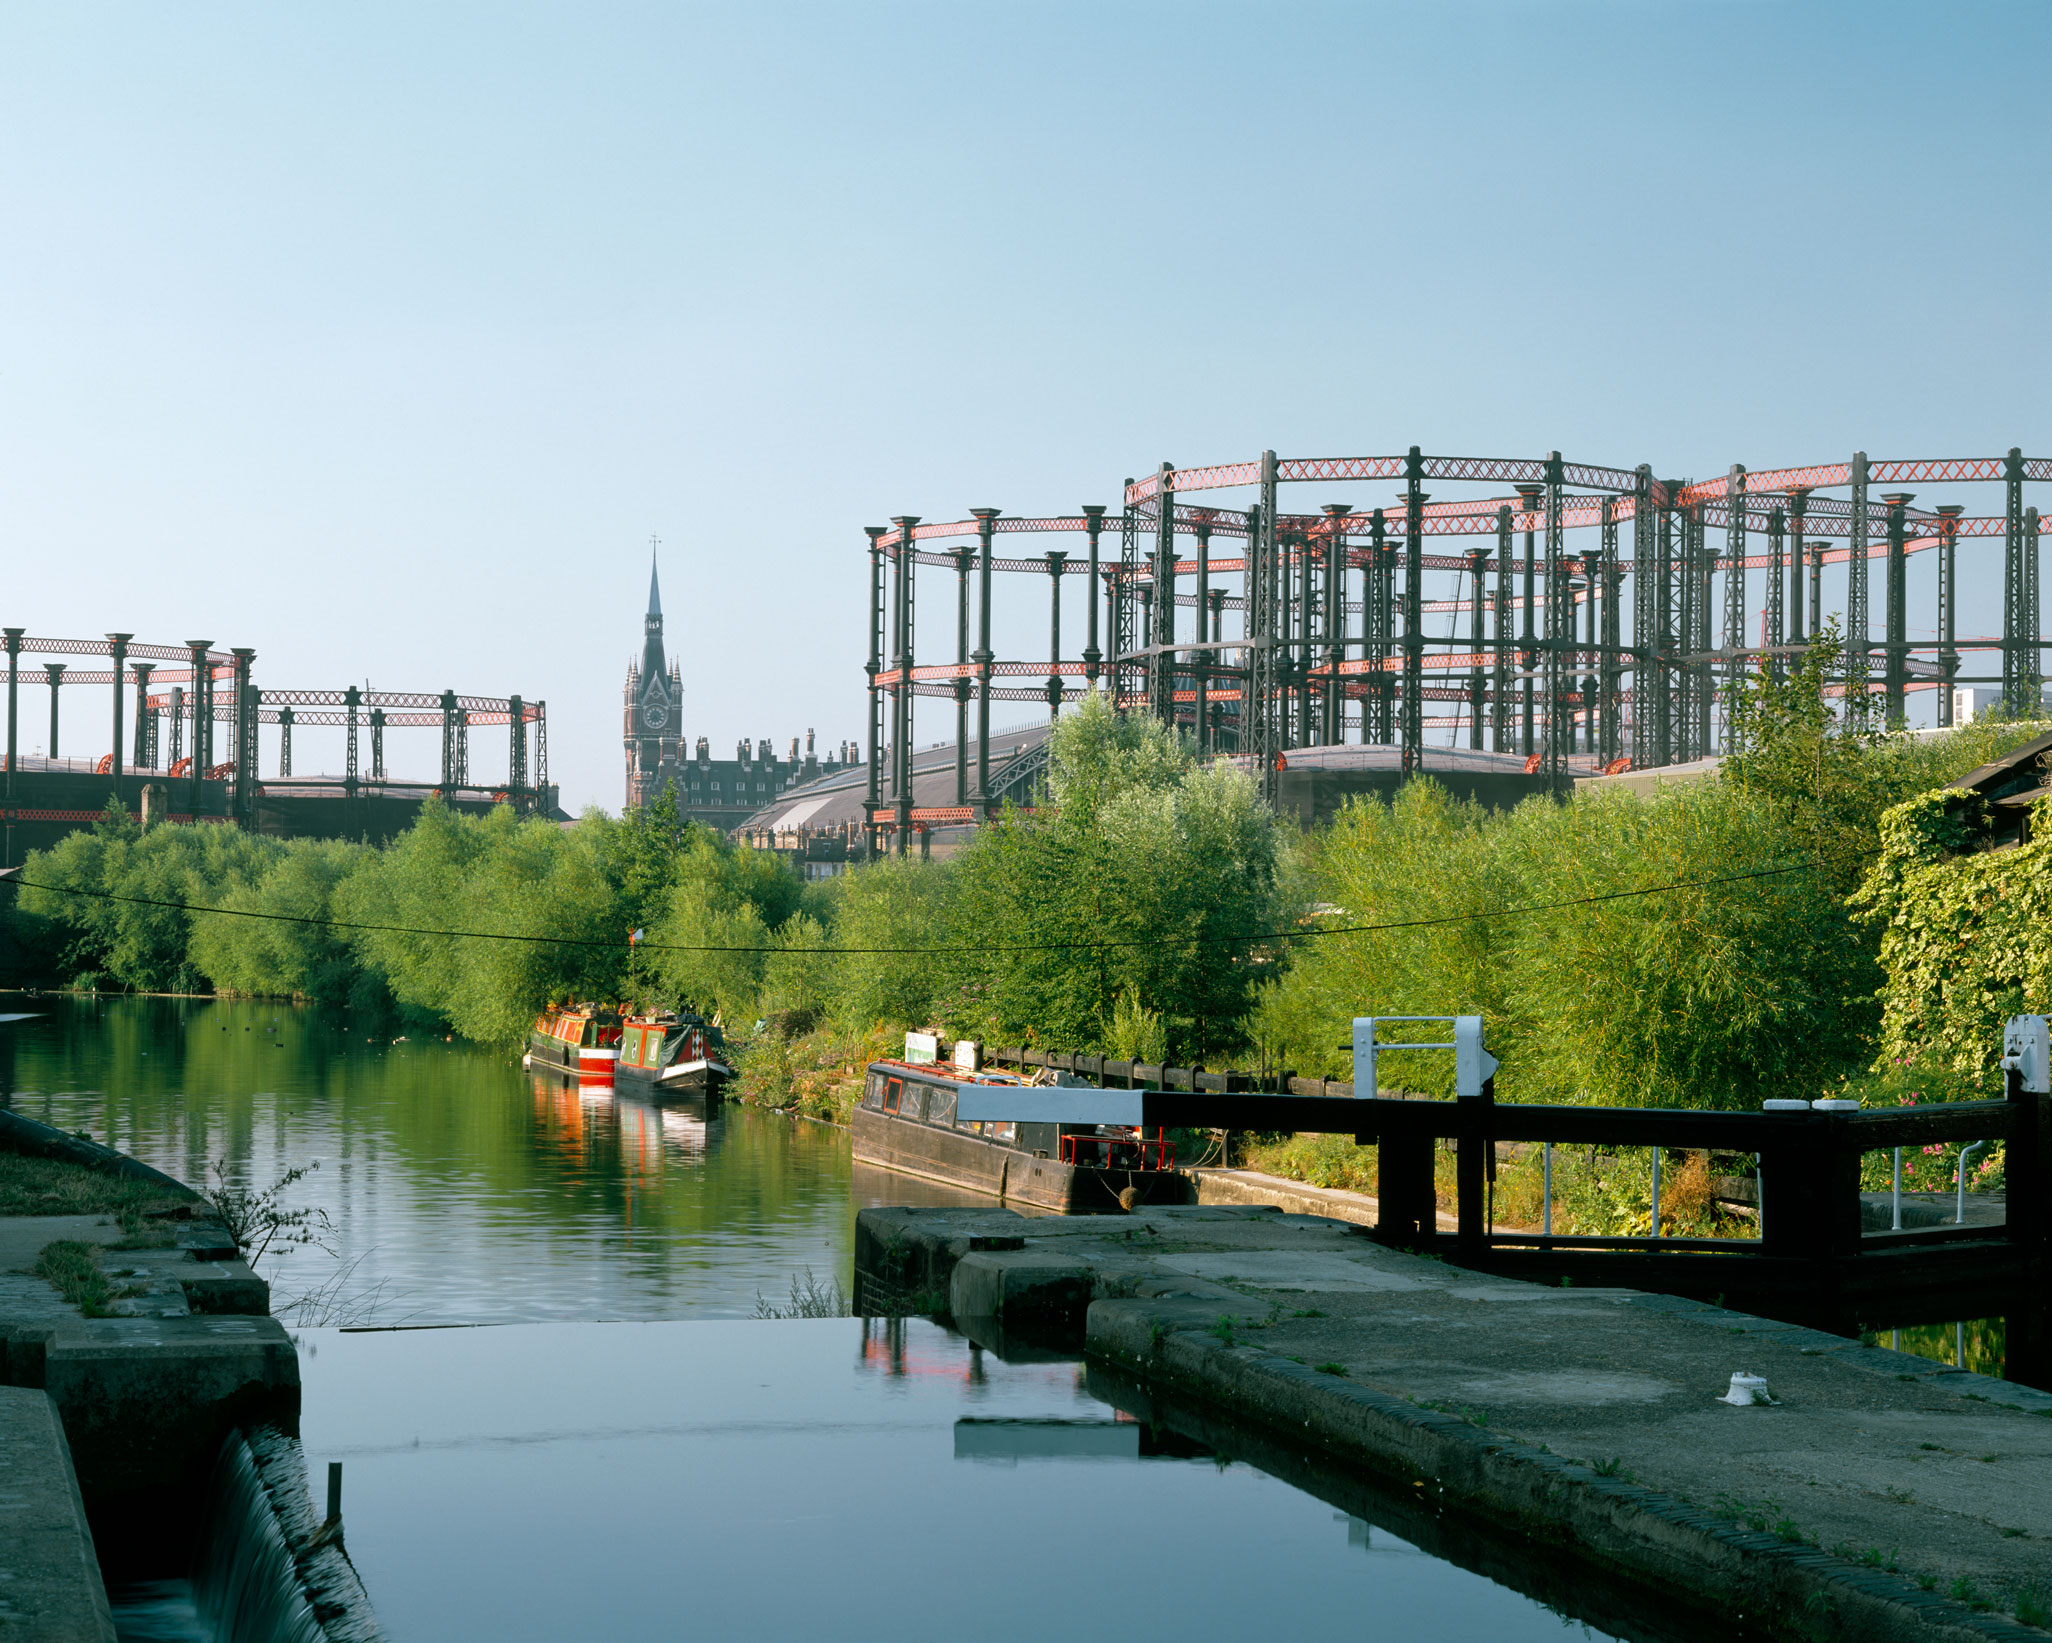 Gasholders next to an urban canal with a railway station in the background.